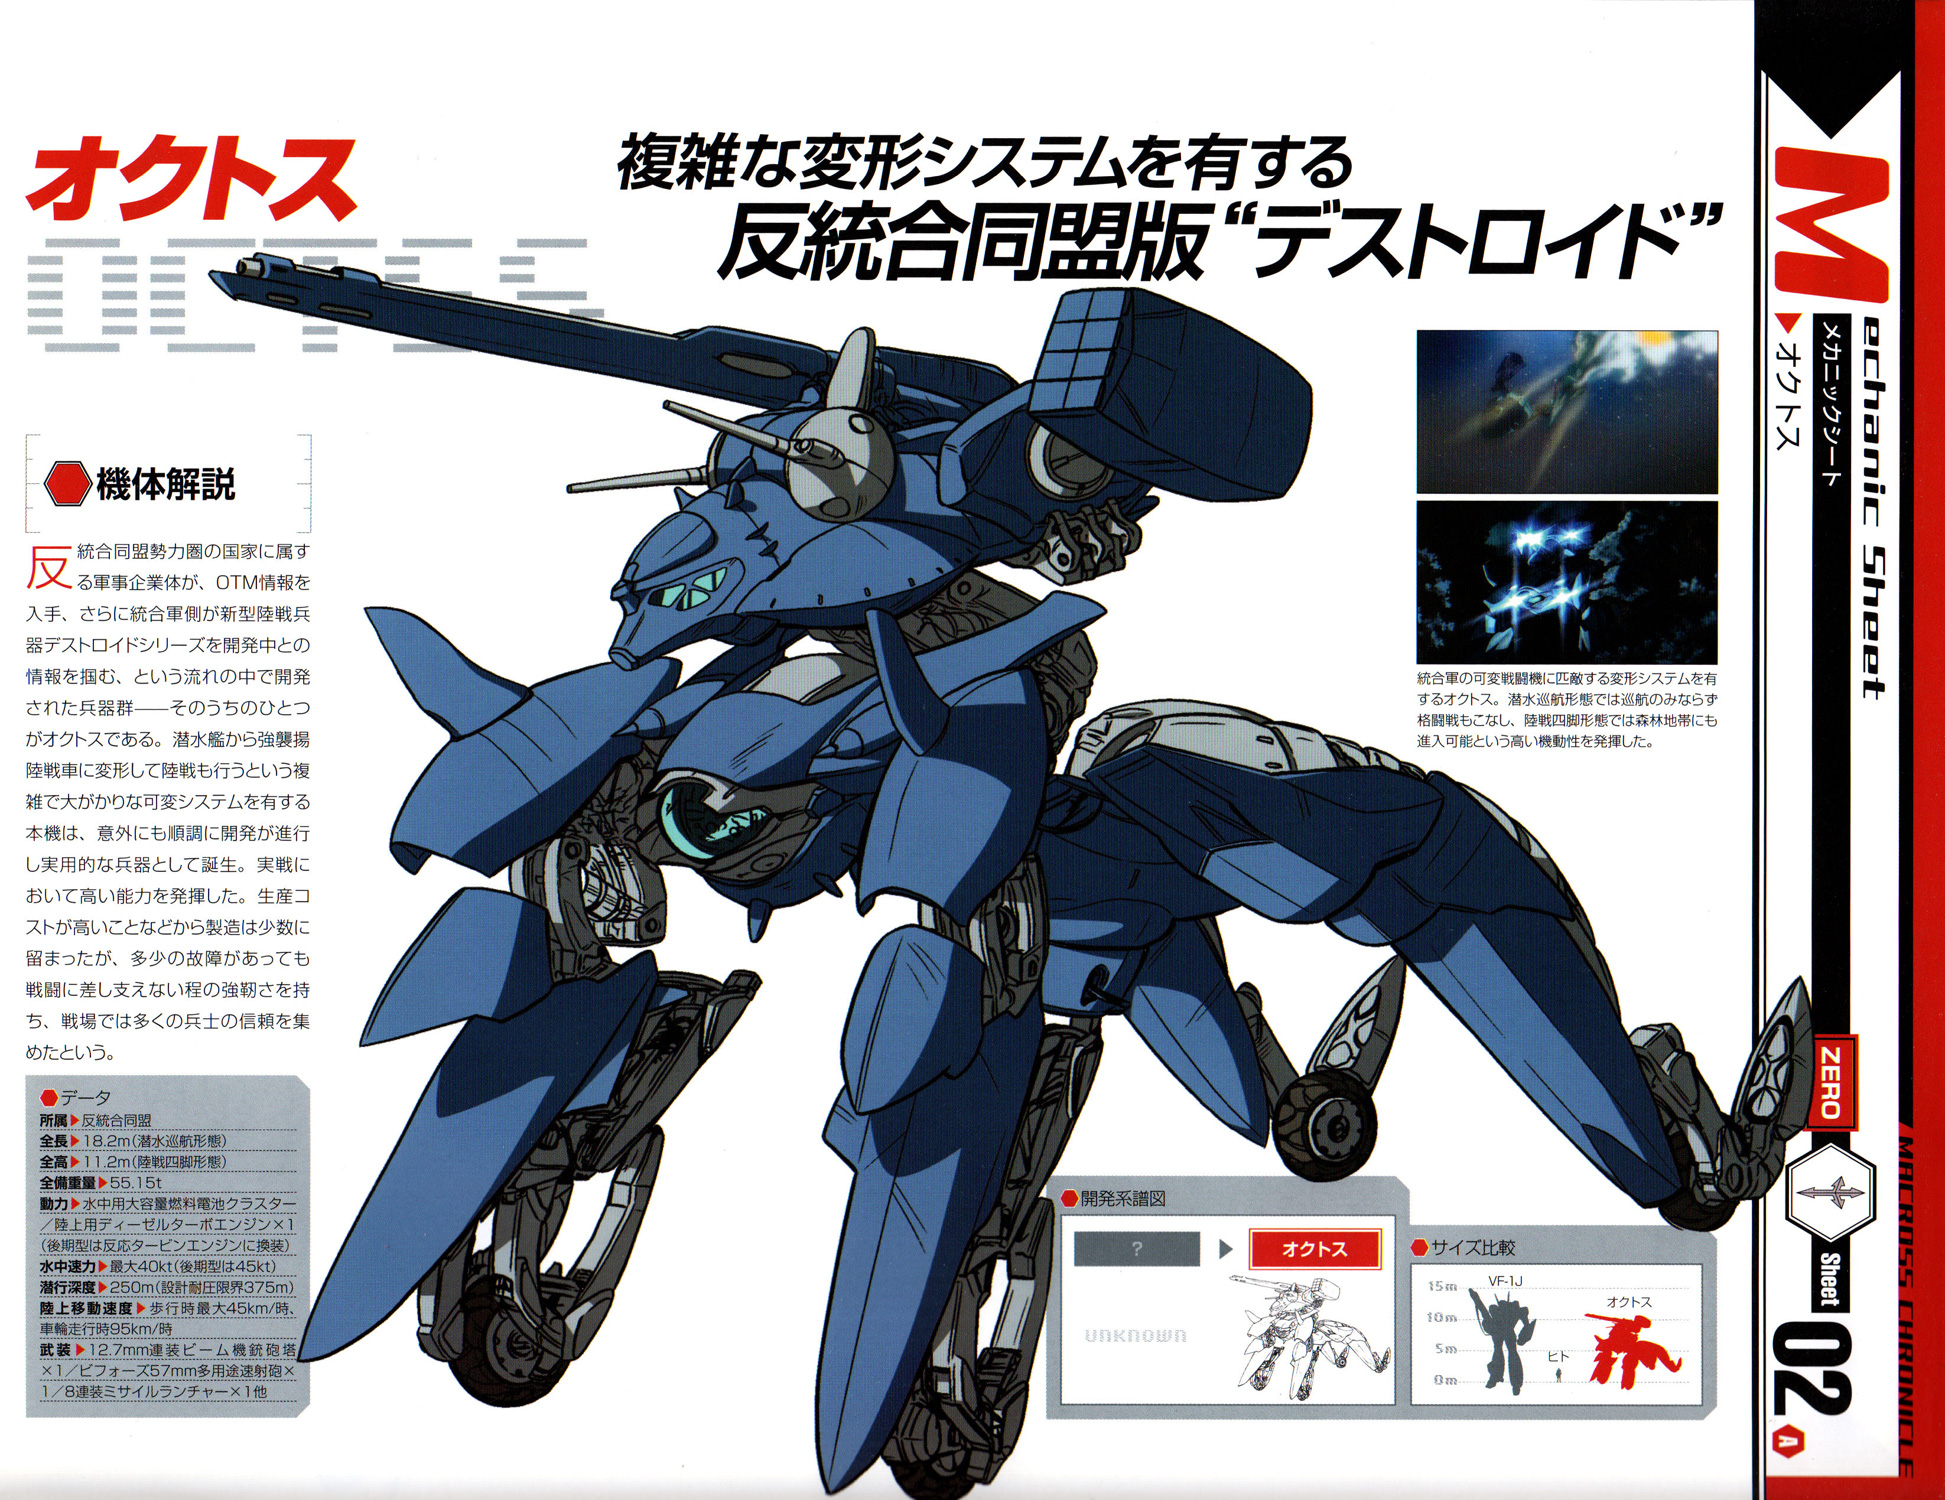 New Macross TV Series in 20xx (sometime this decade) - Page 26 